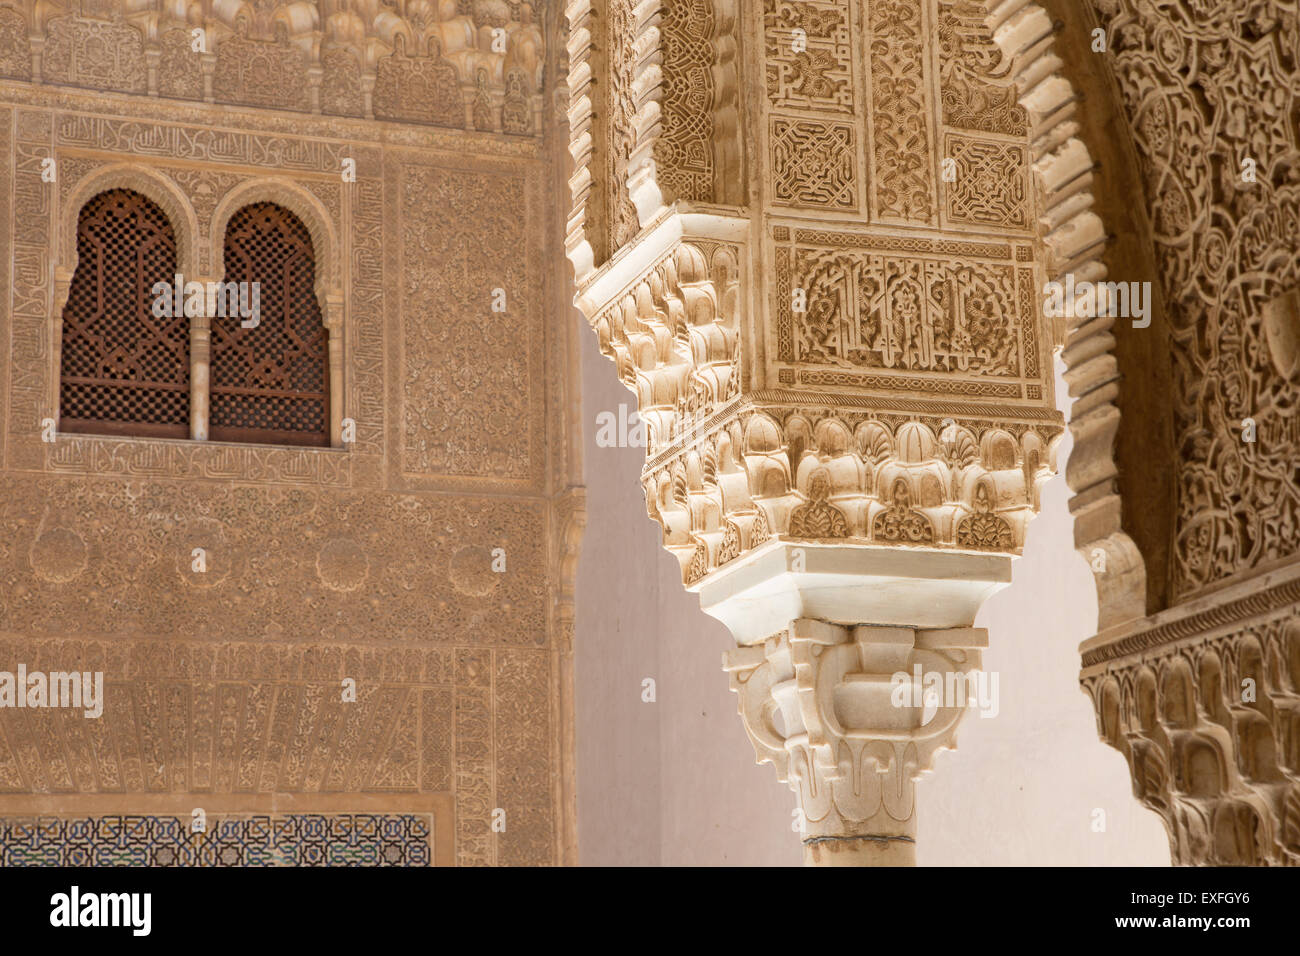 GRANADA, SPAIN - MAY 30, 2015: The detail of column in Nasrid palace and Court of the Lions. Stock Photo